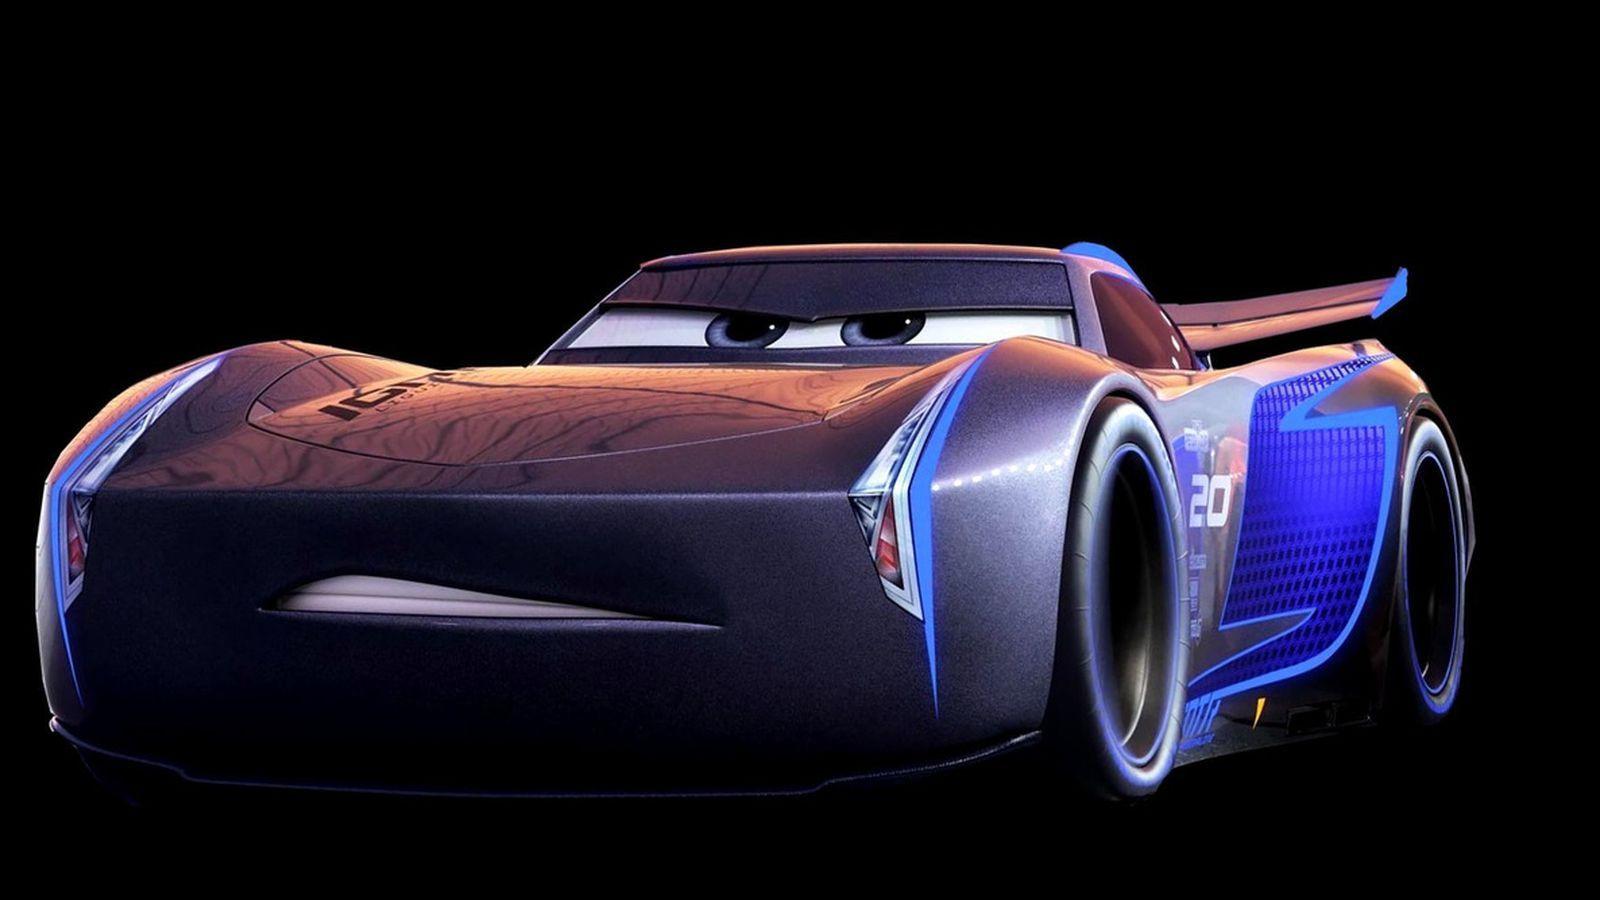 Cars 3 Jackson Storm Wallpapers For Iphone.